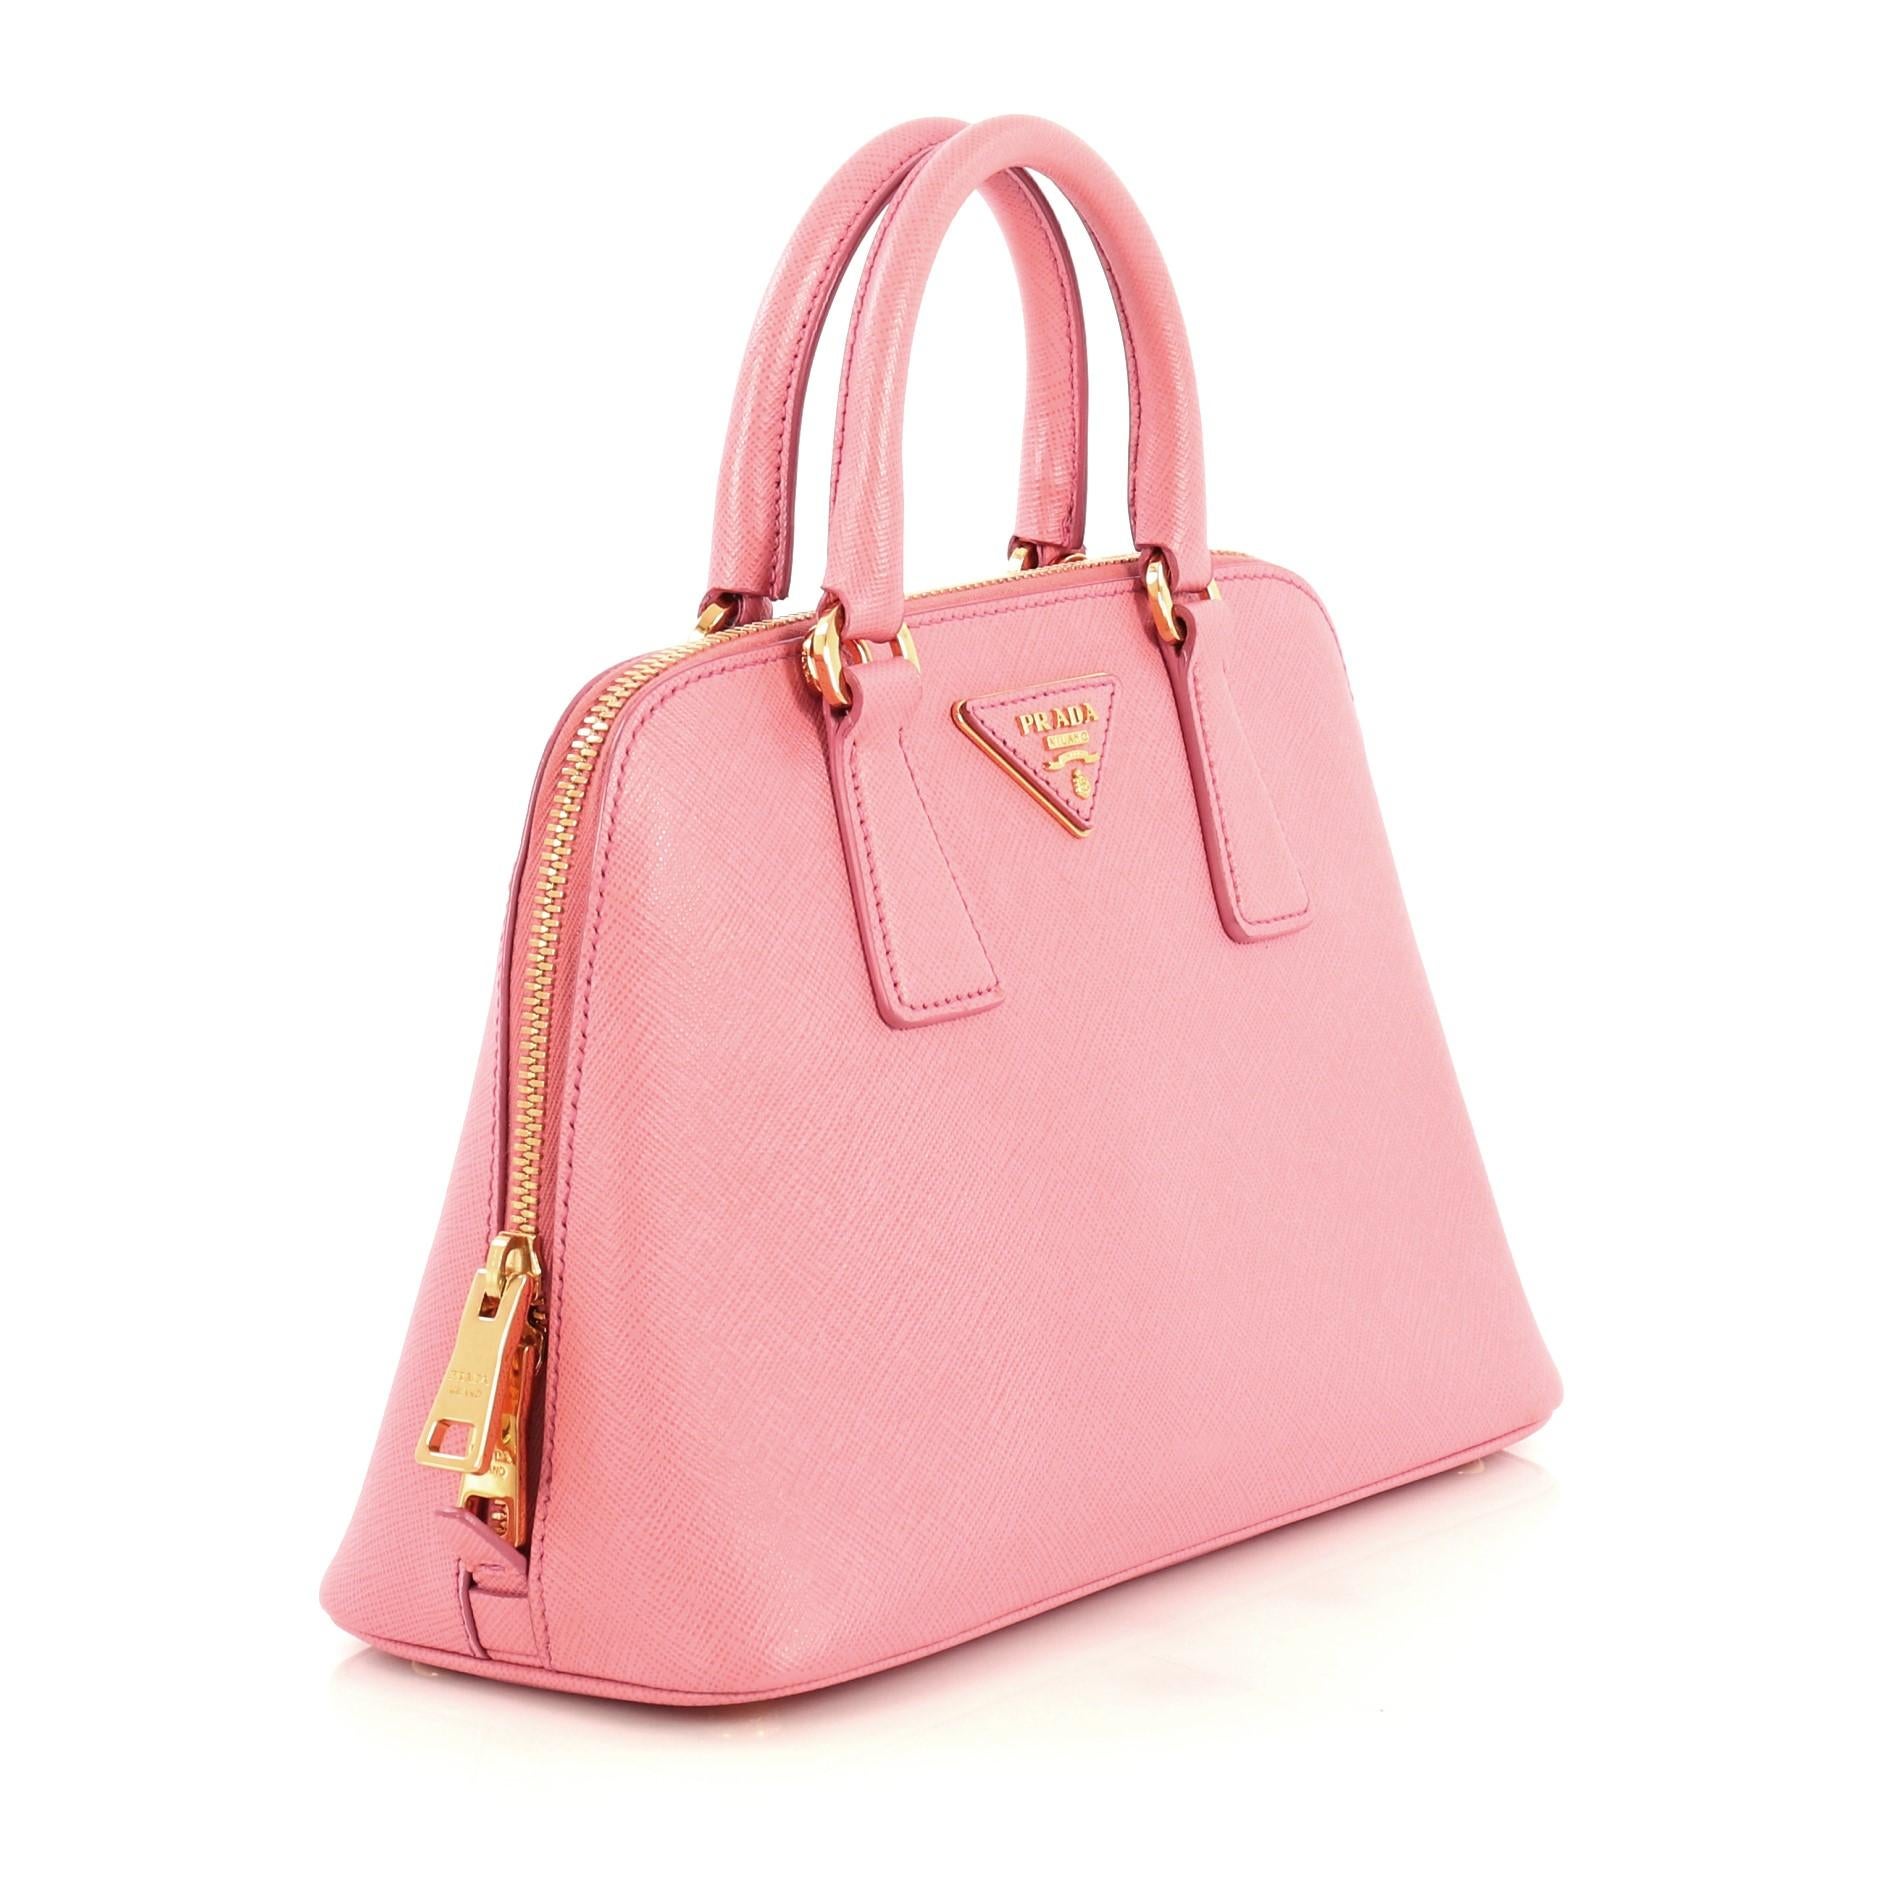 This Prada Promenade Bag Saffiano Leather Small, crafted from pink saffiano leather, features dual rolled handles, triangle Prada logo, and gold-tone hardware. Its two-way zip closure opens to a pink fabric interior with a center zip compartment and